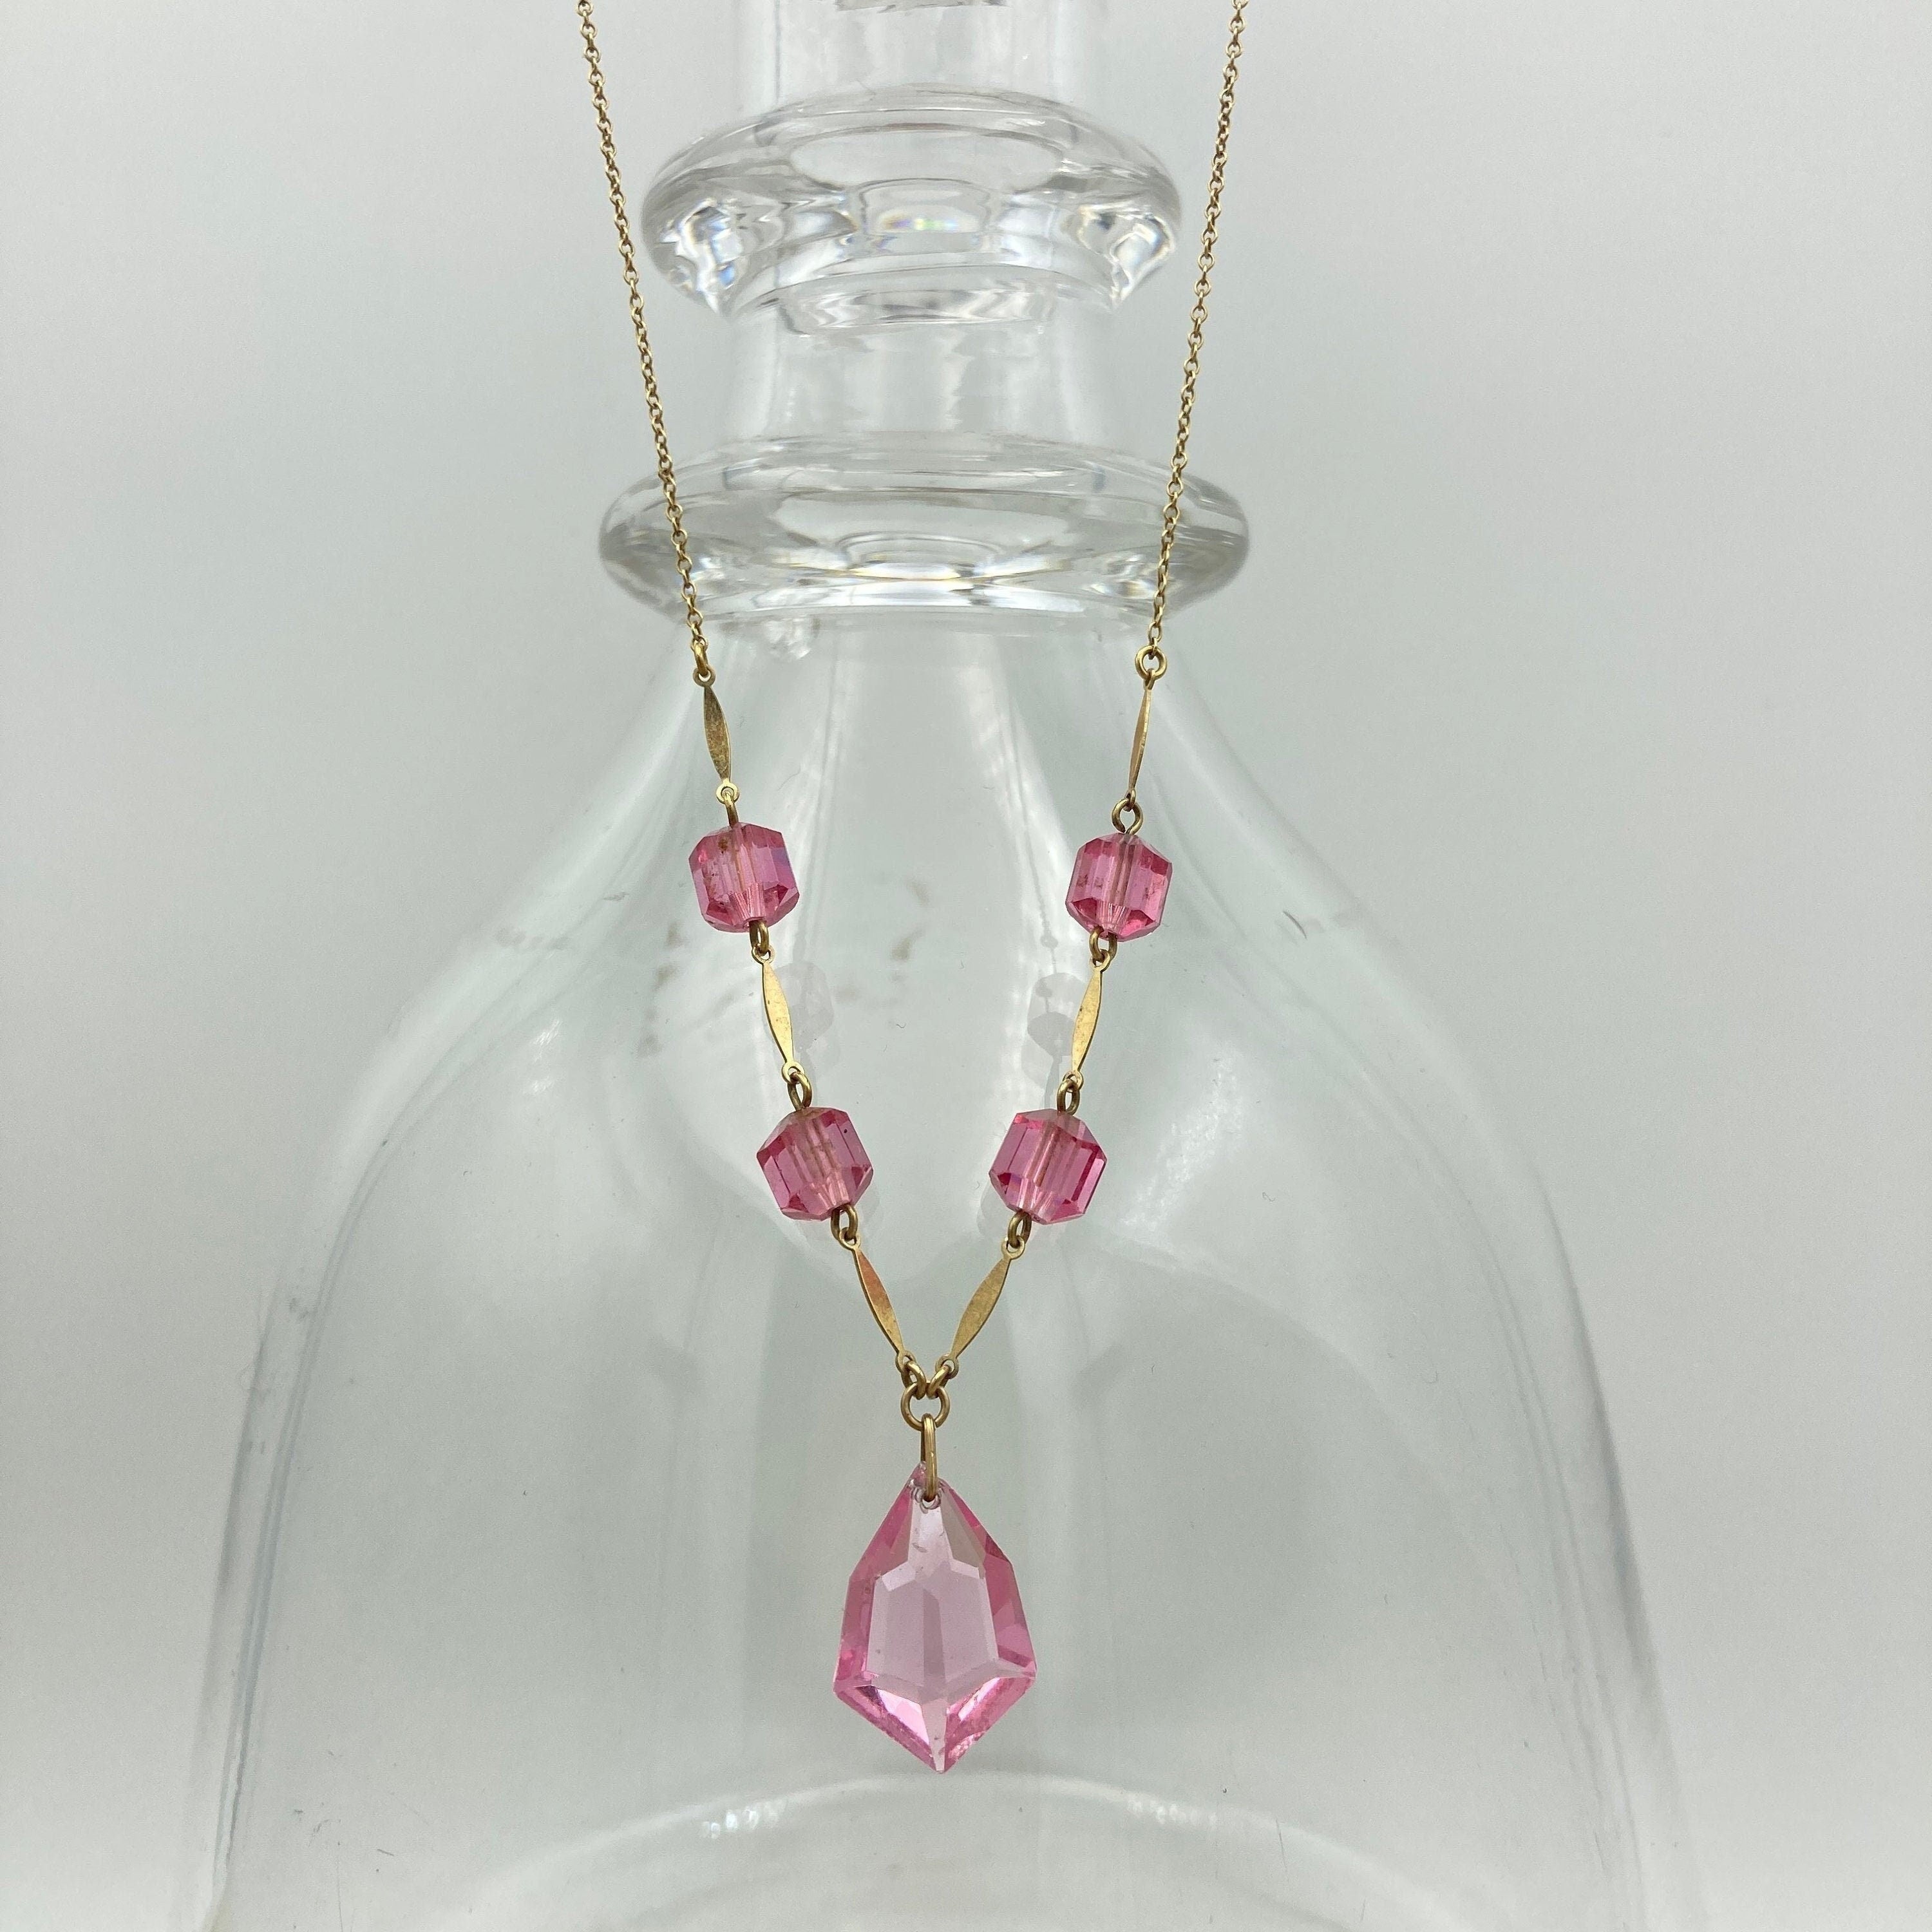 Art deco 9ct gold faceted pink glass drop fine trace link chain necklace 39cm long 9k gold